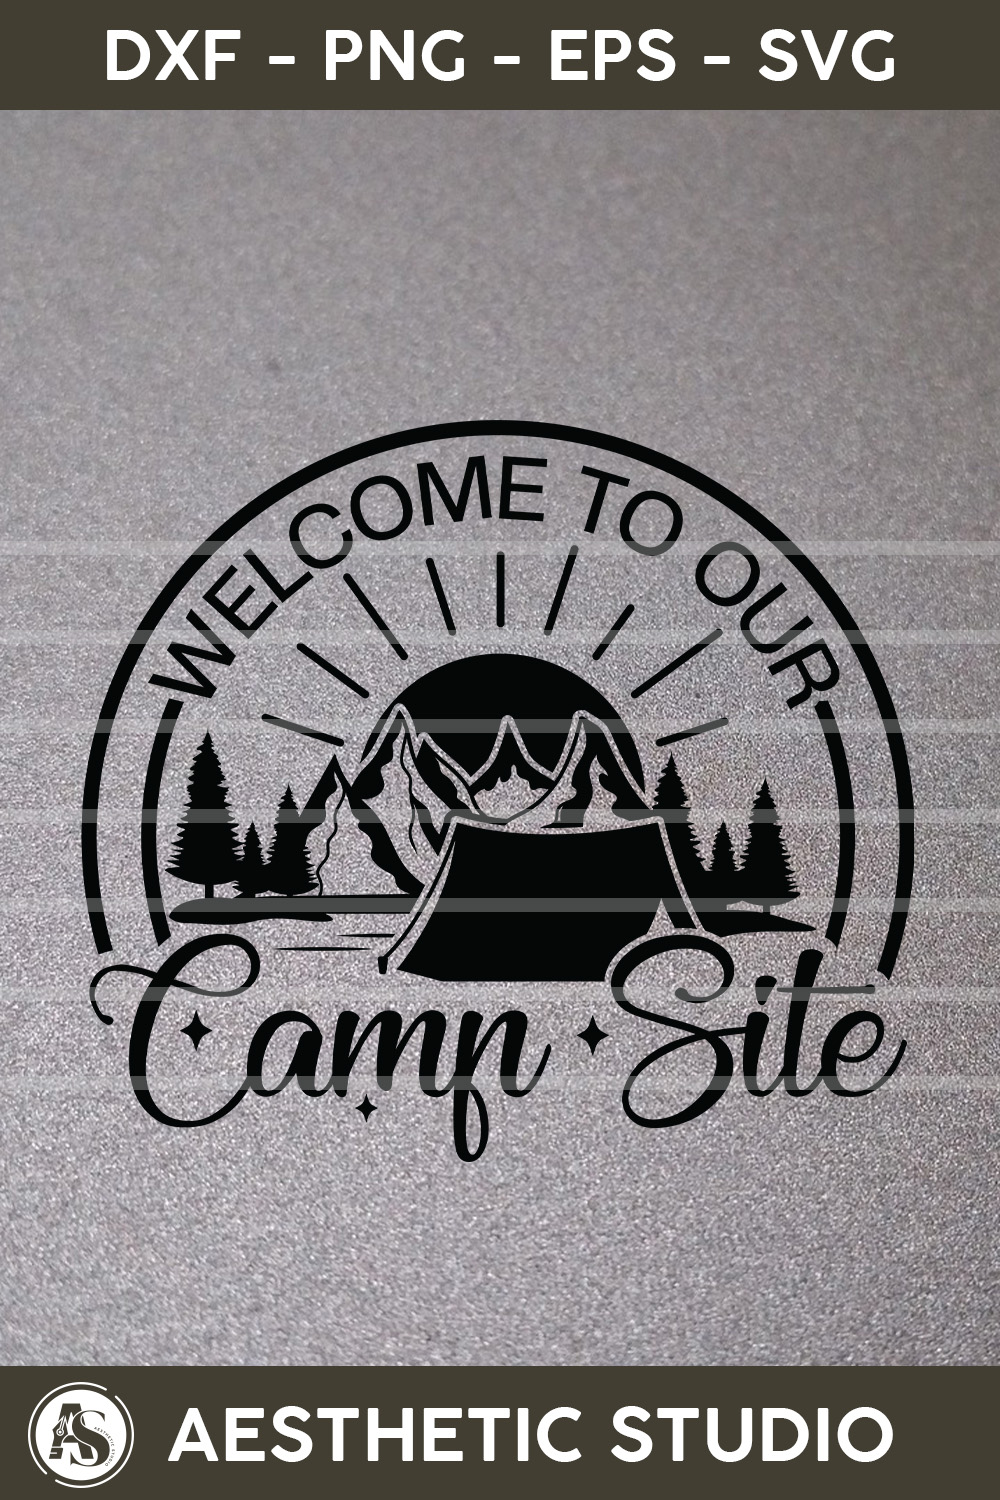 Welcome To Our Camp Site, Welcome Camping Svg, Camper, Adventure, Camp Life, Camping Svg, Typography, Camping Quotes, Camping Cut File, Funny Camping, Camping T-shirt Design, Svg, Eps, Dxf, Png, Cut file pinterest preview image.